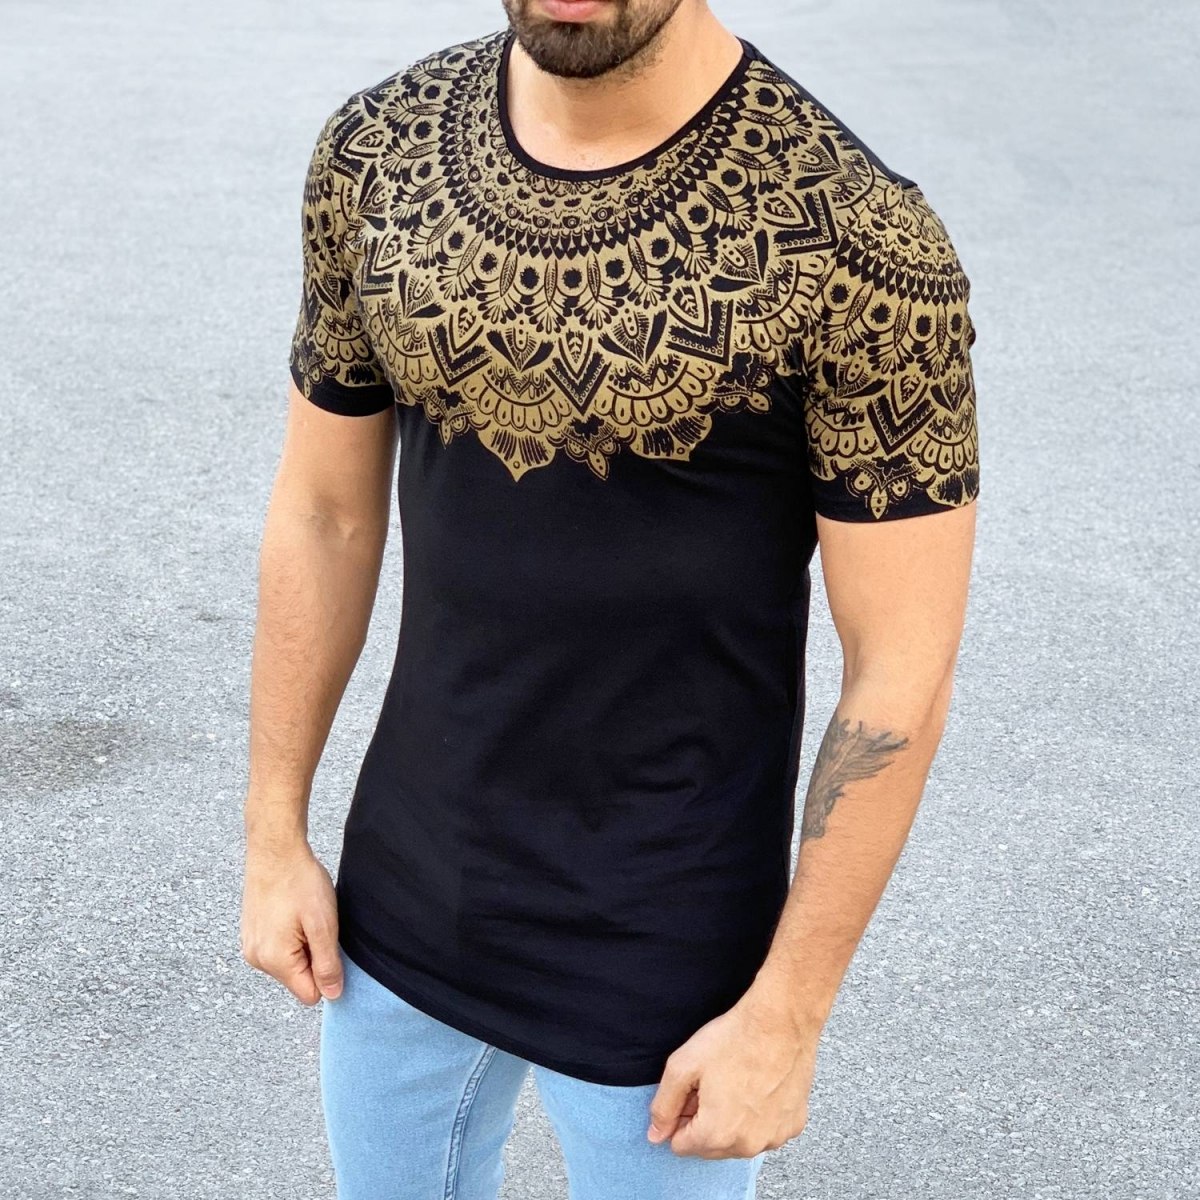 Men's Fitted Ethnic Pattern T-Shirt Black